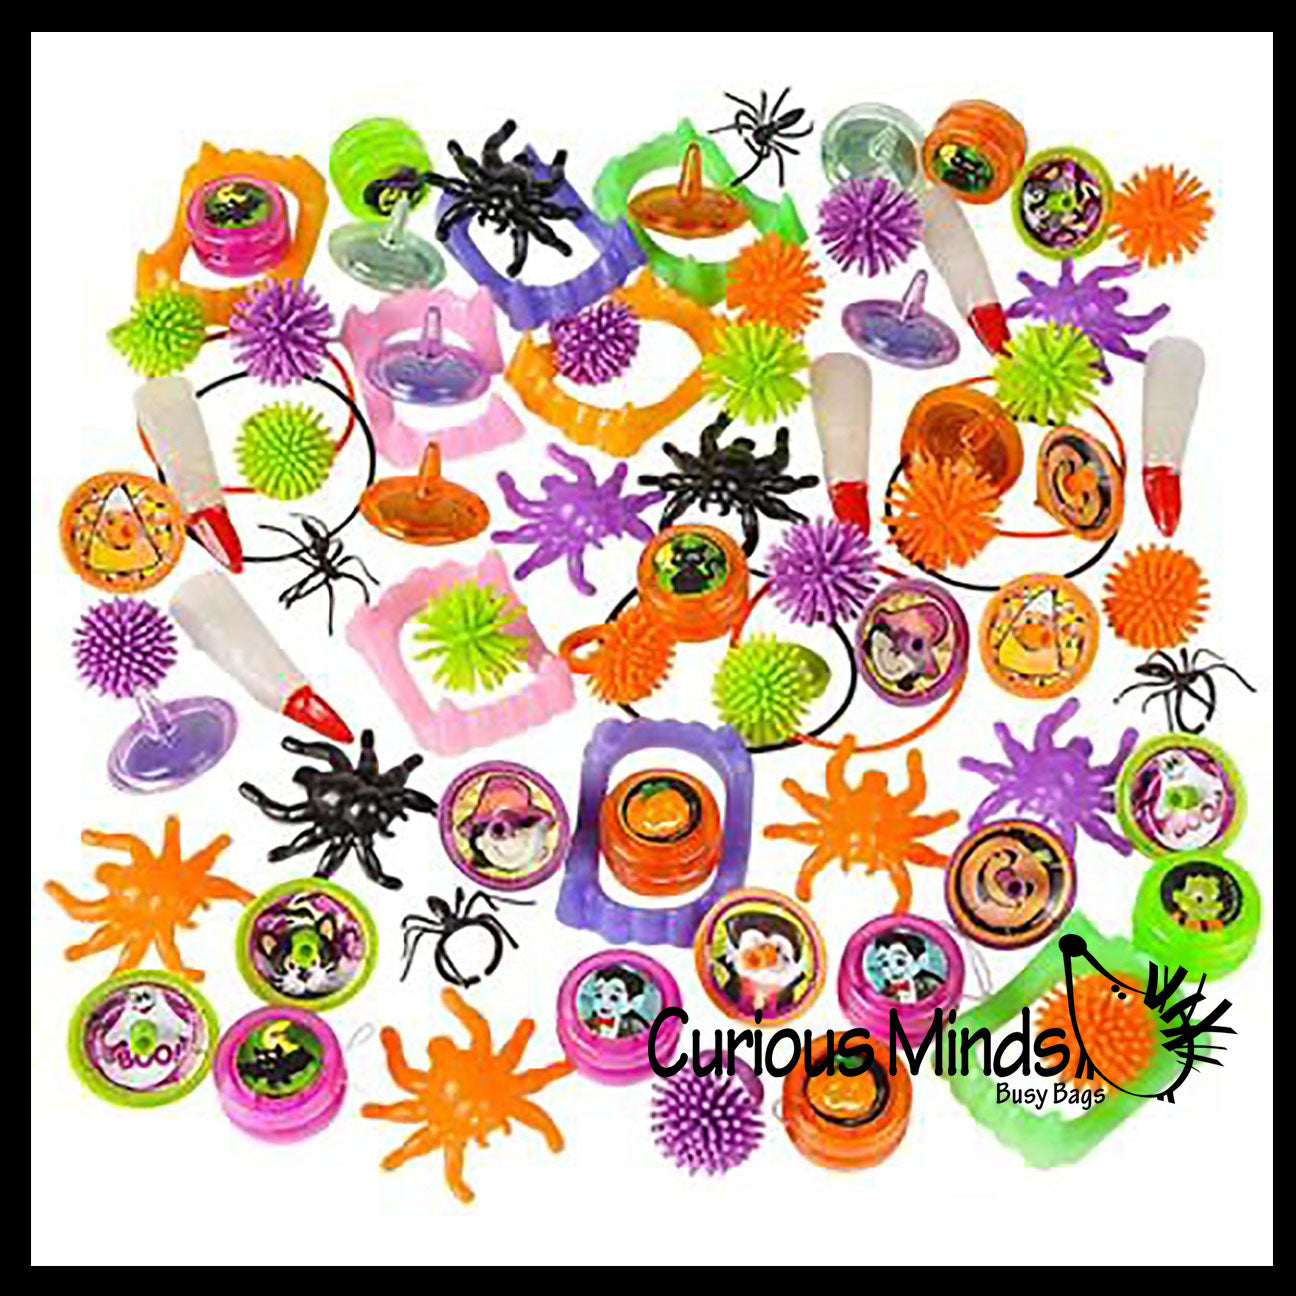 BULK 50 Piece Halloween Toy Assortment - Small Toys for Trick or Treat